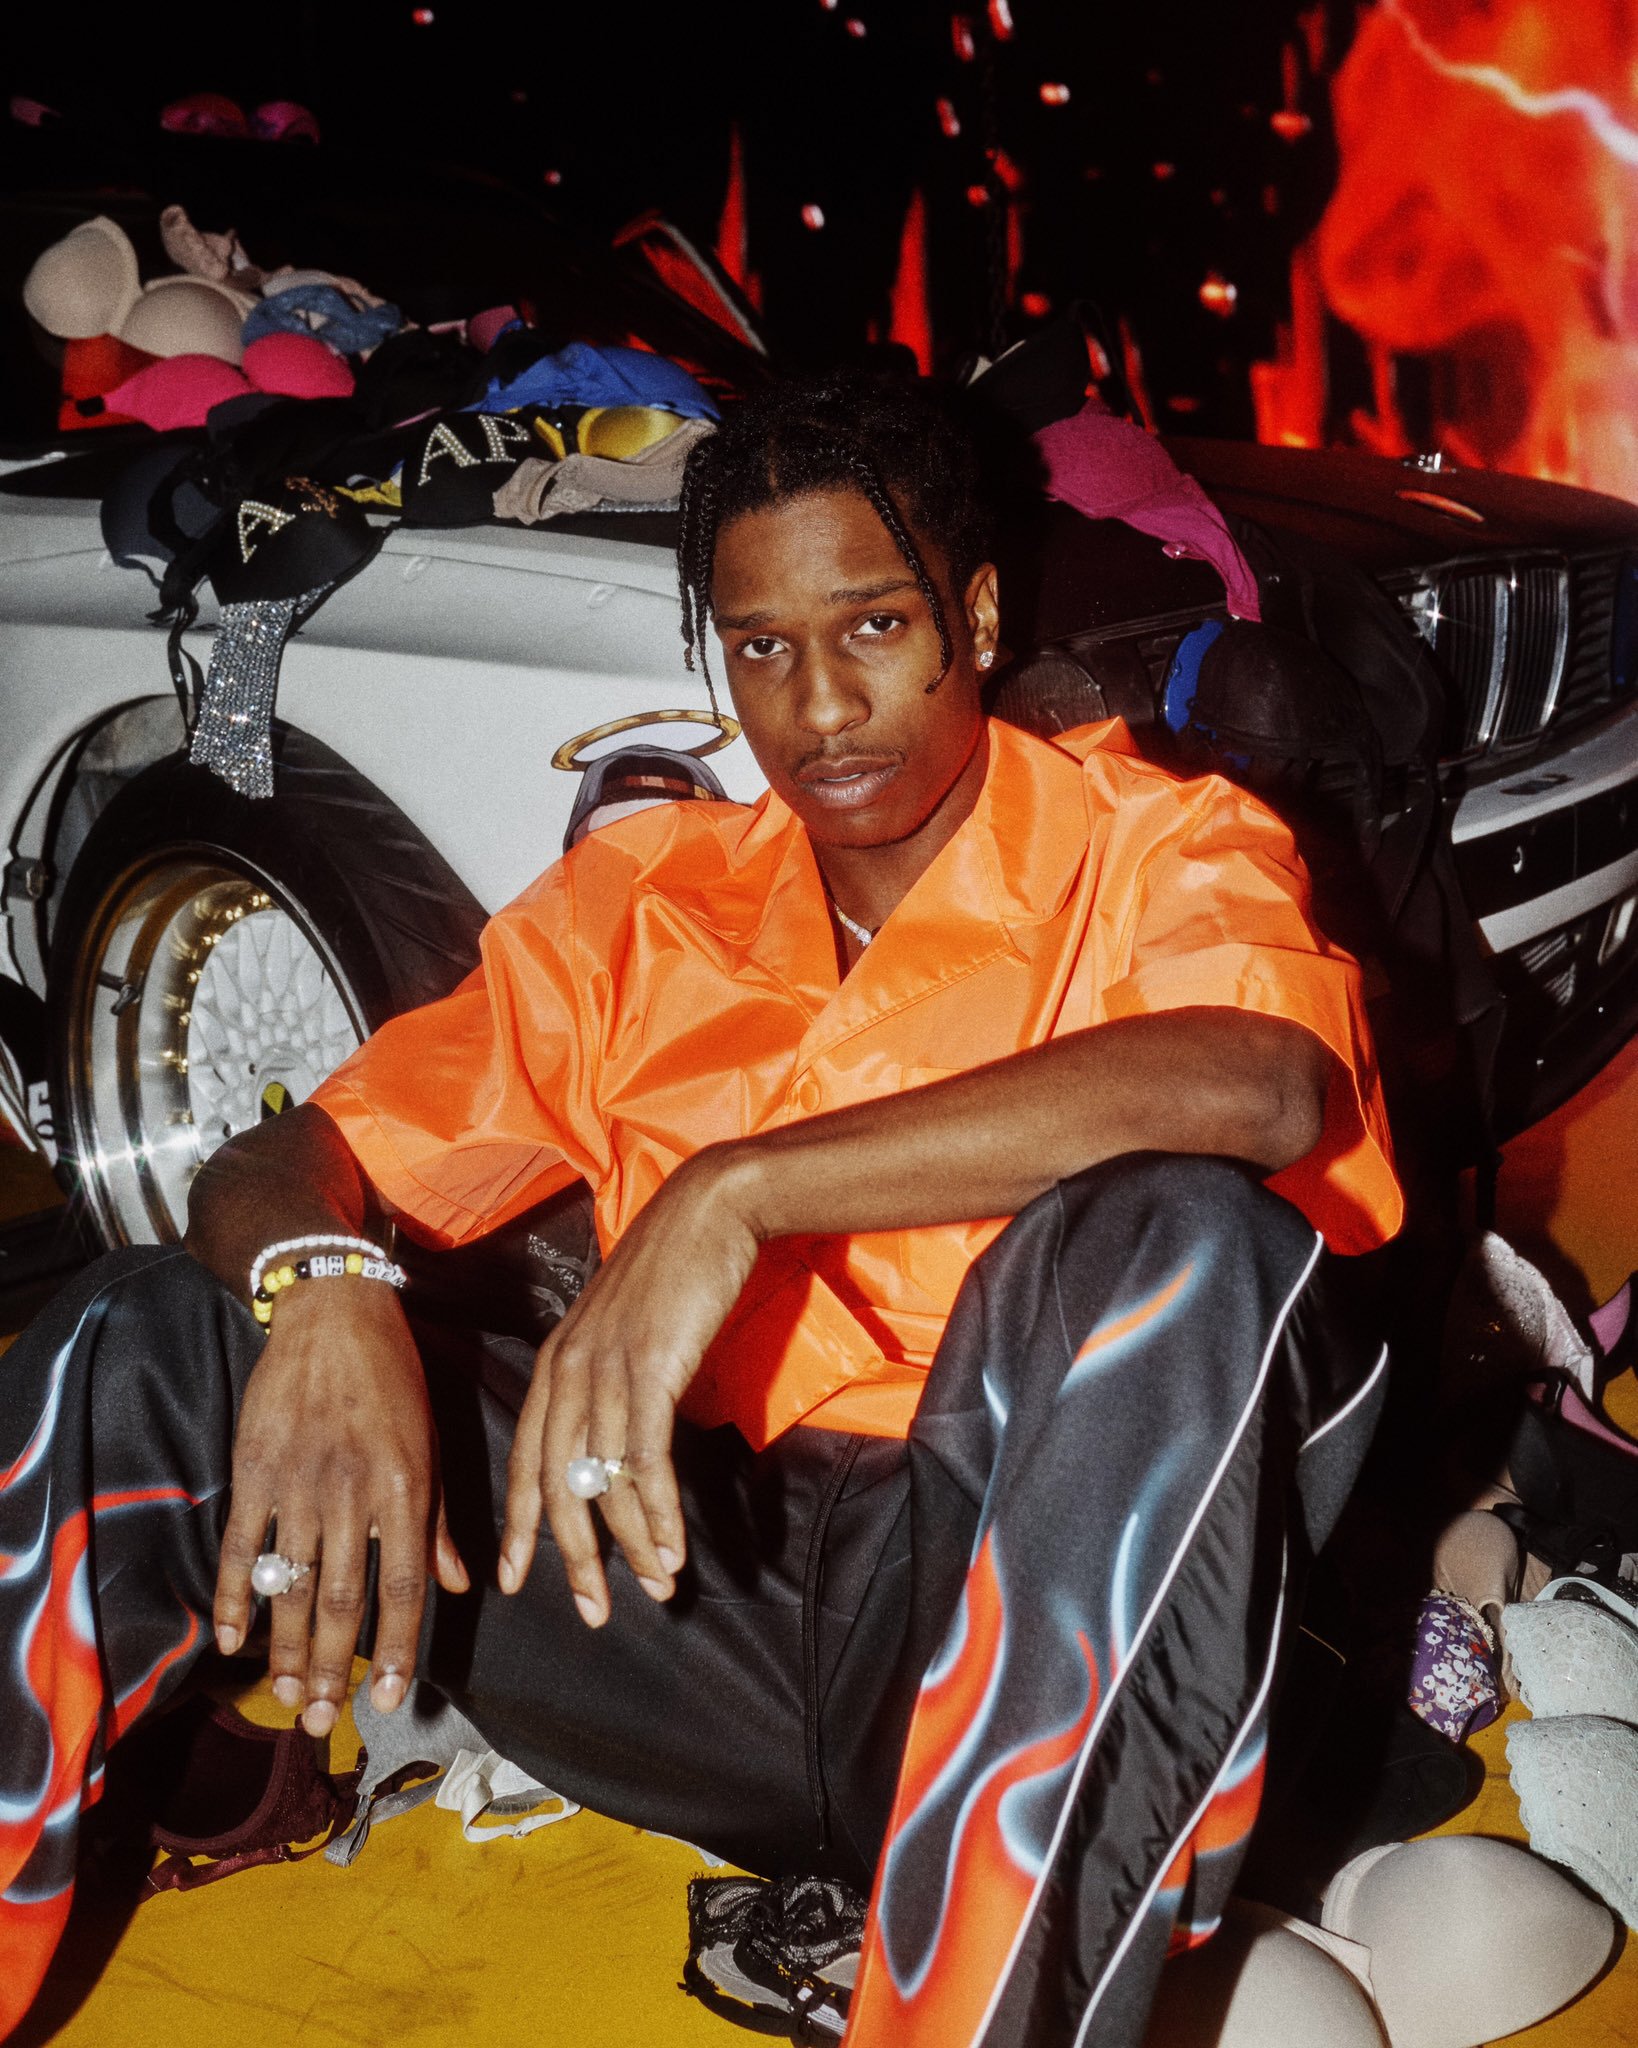 everyday asap rocky download mp3skull